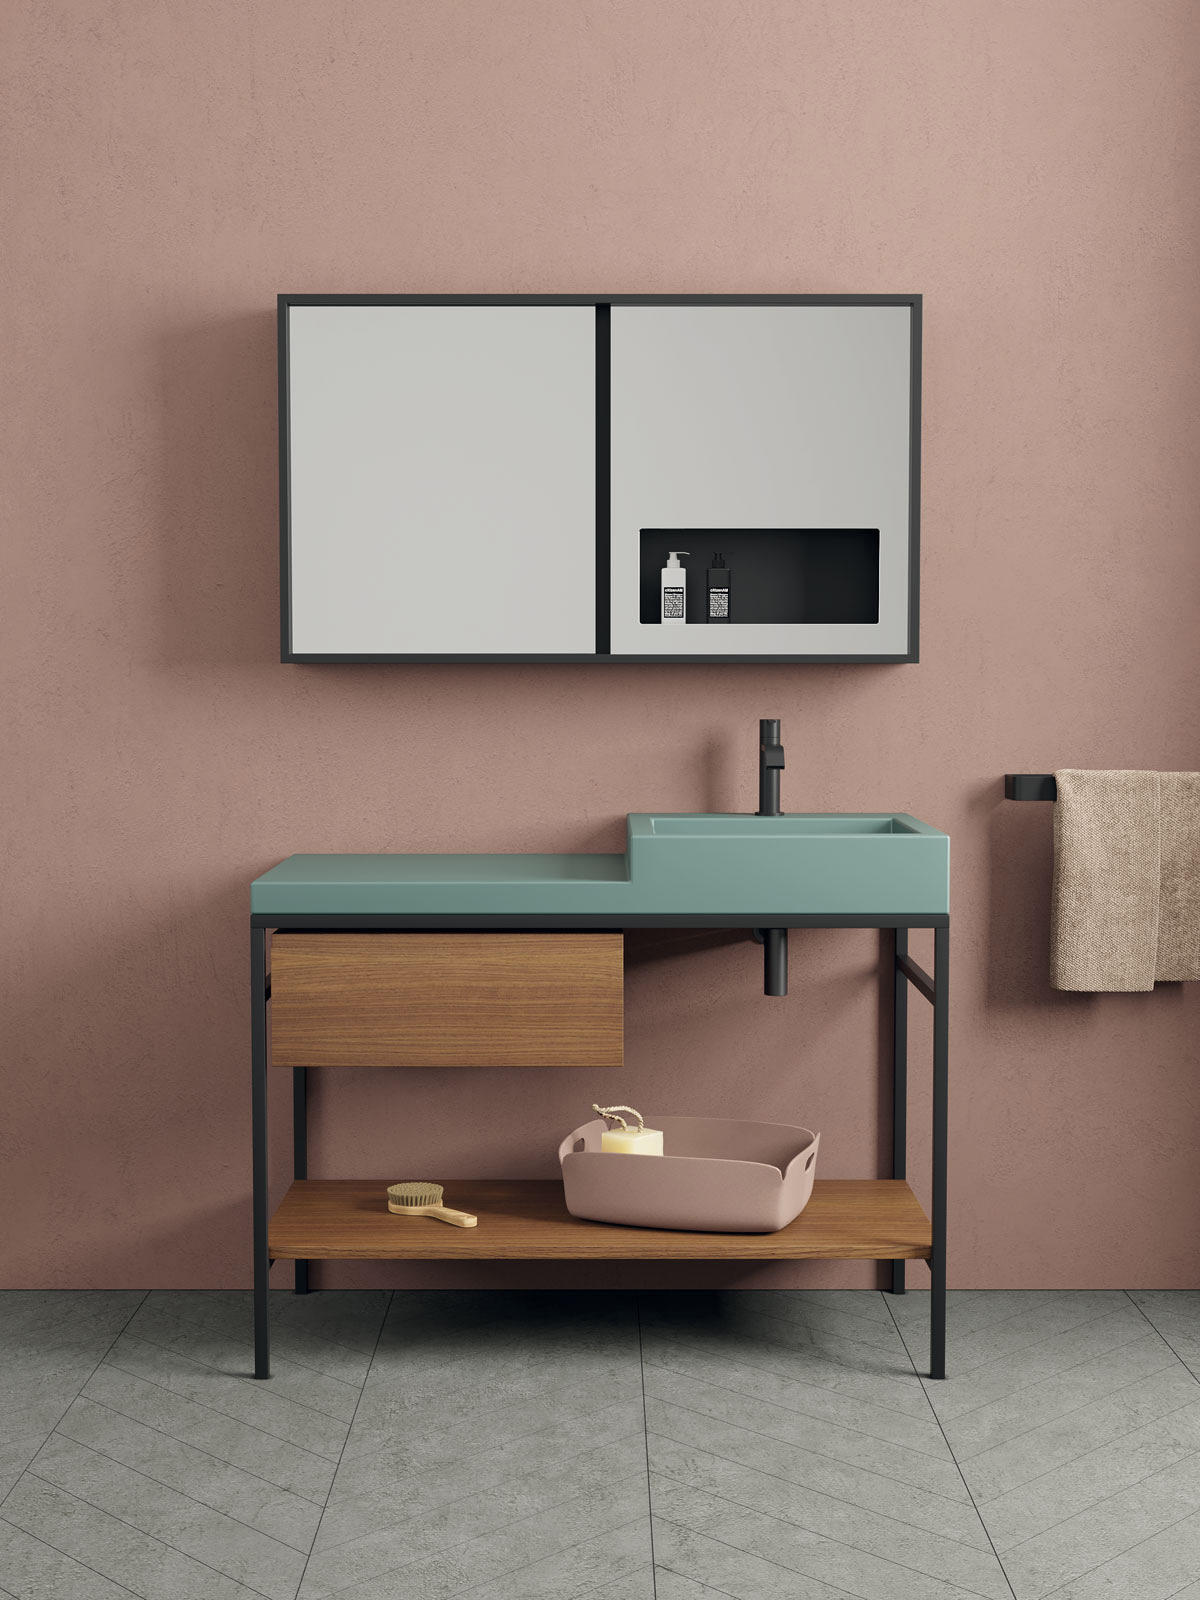 SEMPLICE 105 - Vanity units from NIC Design | Architonic